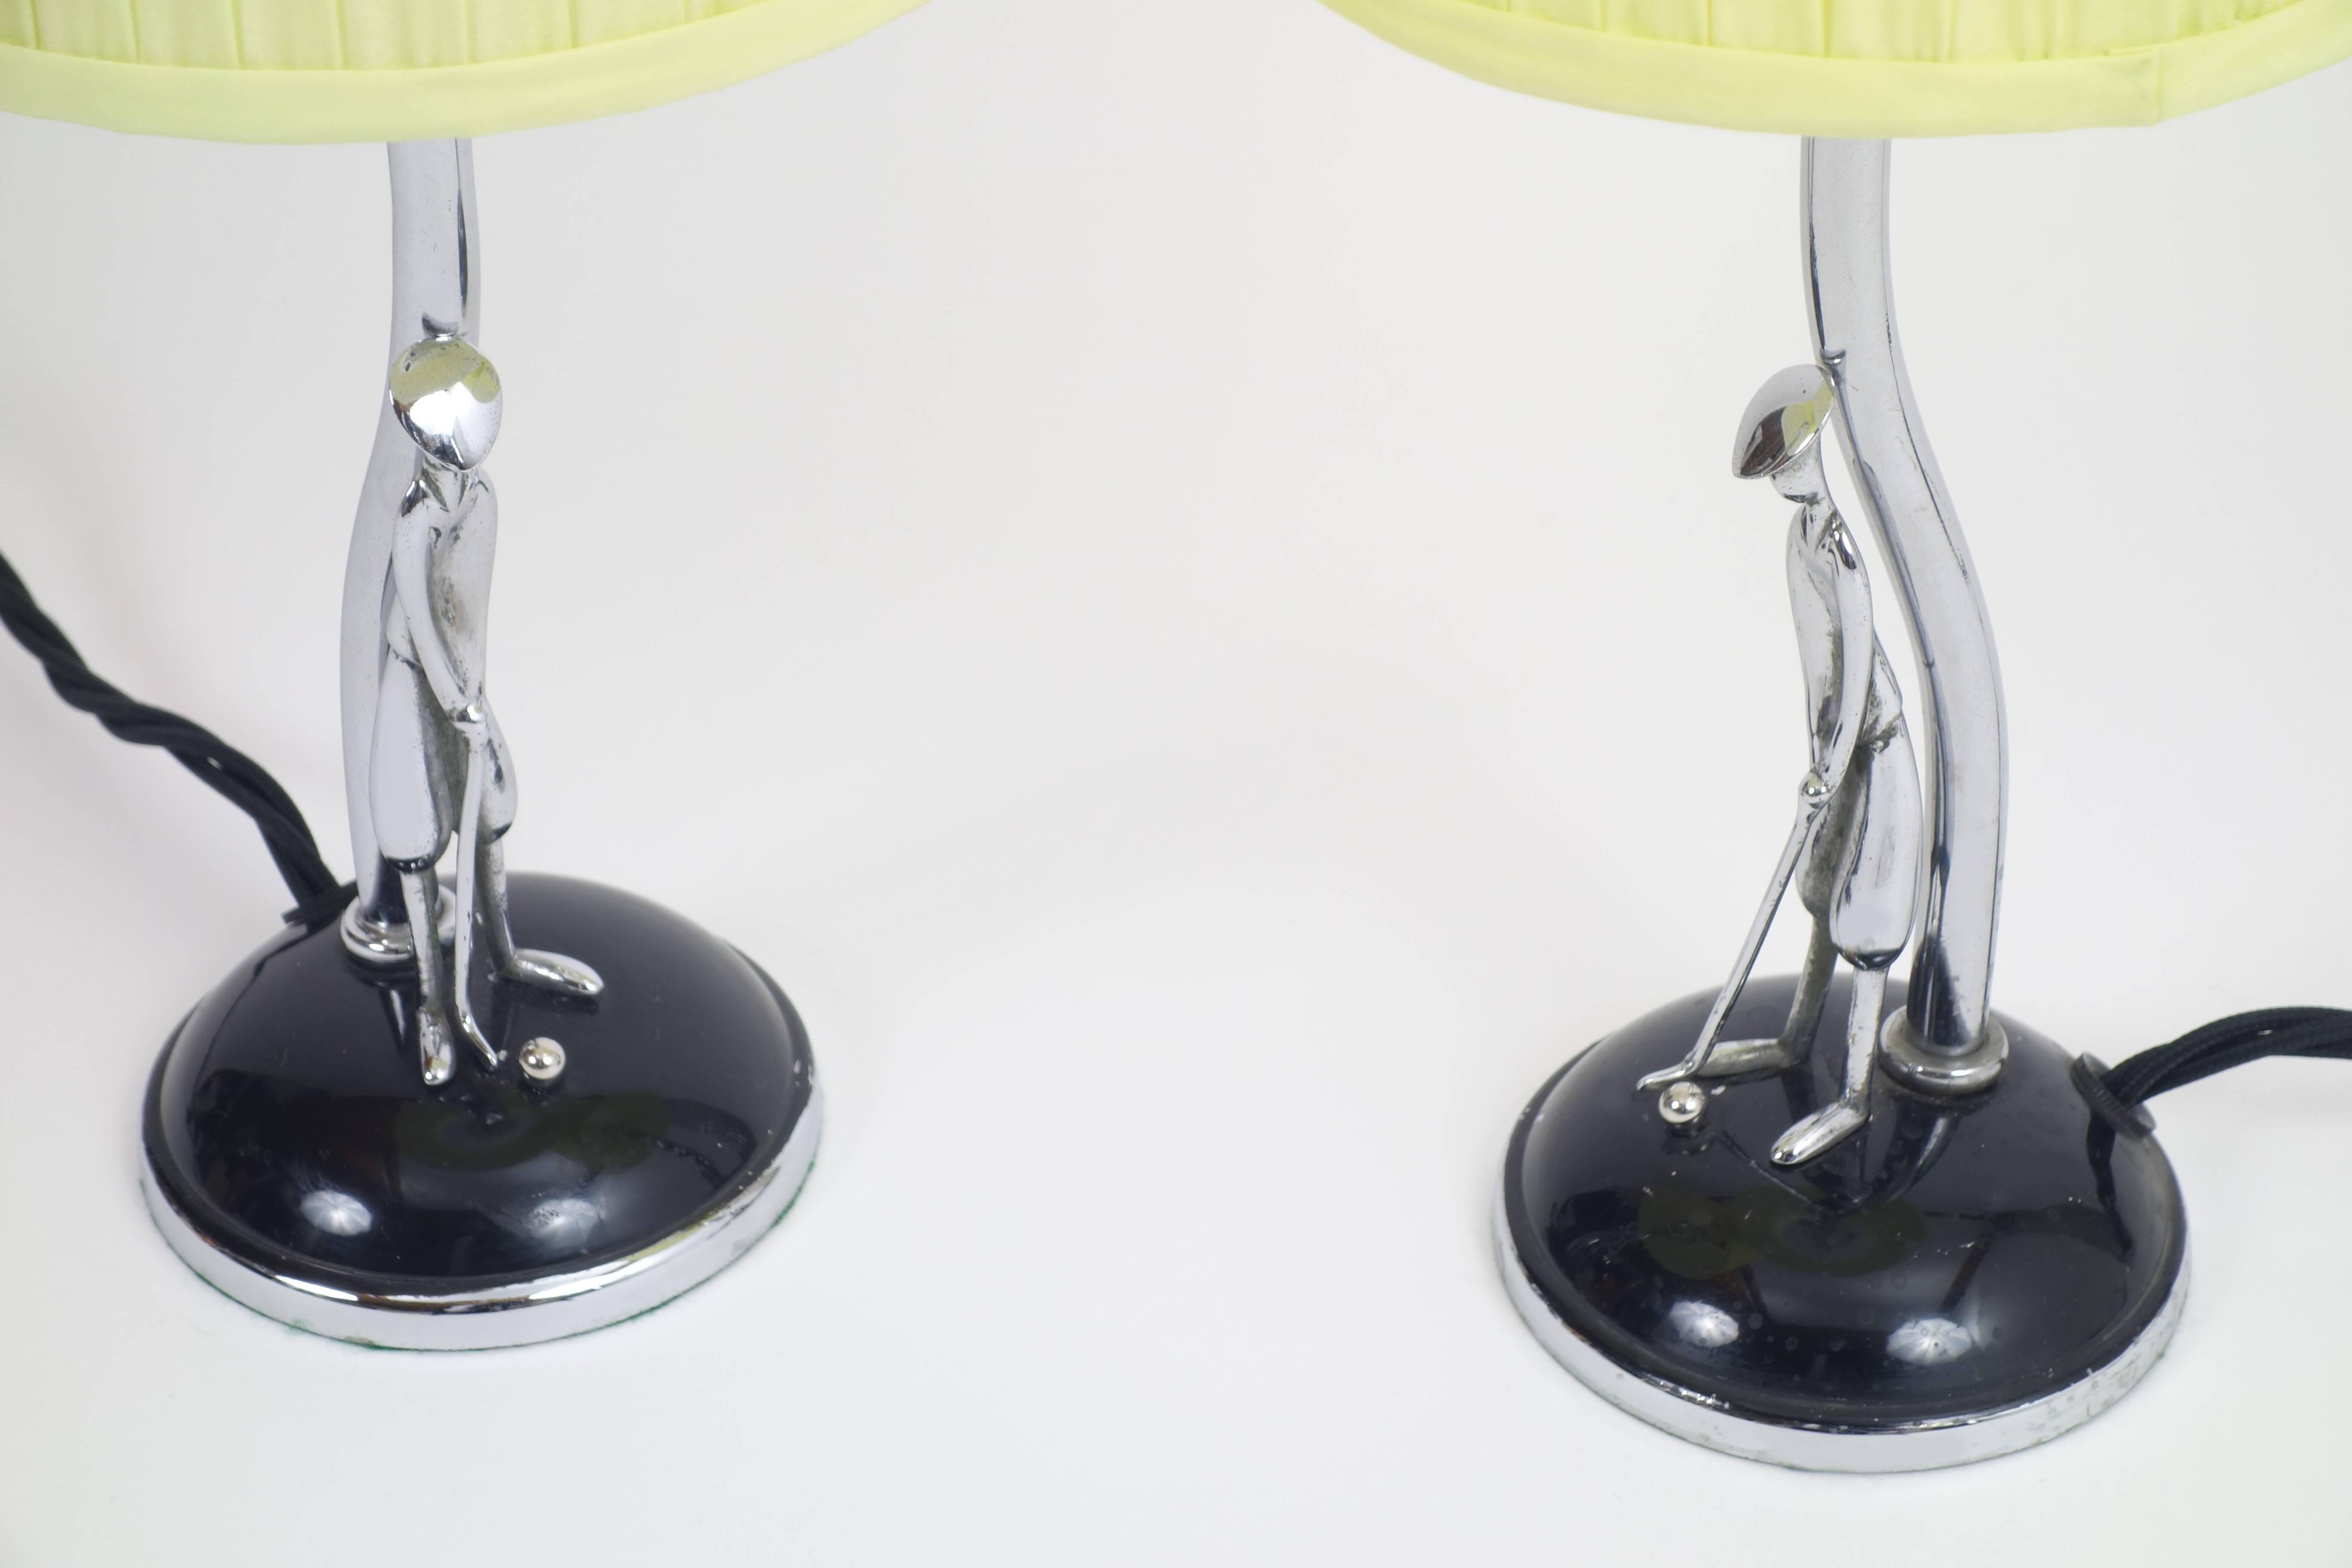 Pair of Hagenauer table lamps showing golf players on teeing ground in the 1930s. Gathered silk lampshades in lemon yellow hue.